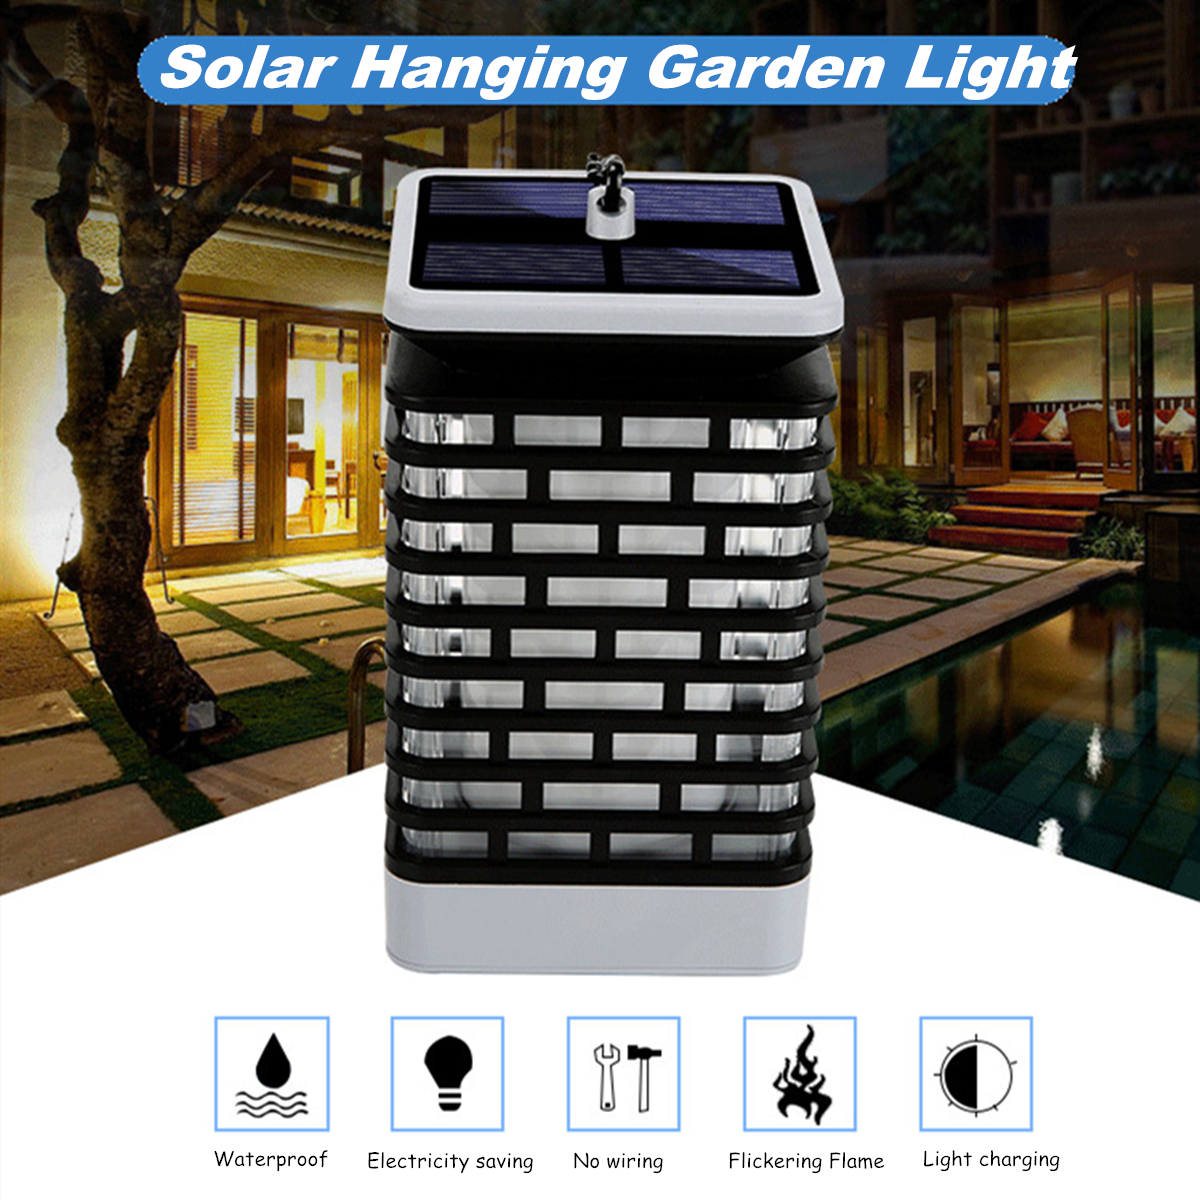 LED-Solar-Hanging-Light-Flickering-Flame-Lawn-Garden-Candle-Lantern-Lamp-for-Home-Garden-Decoration-1793632-2